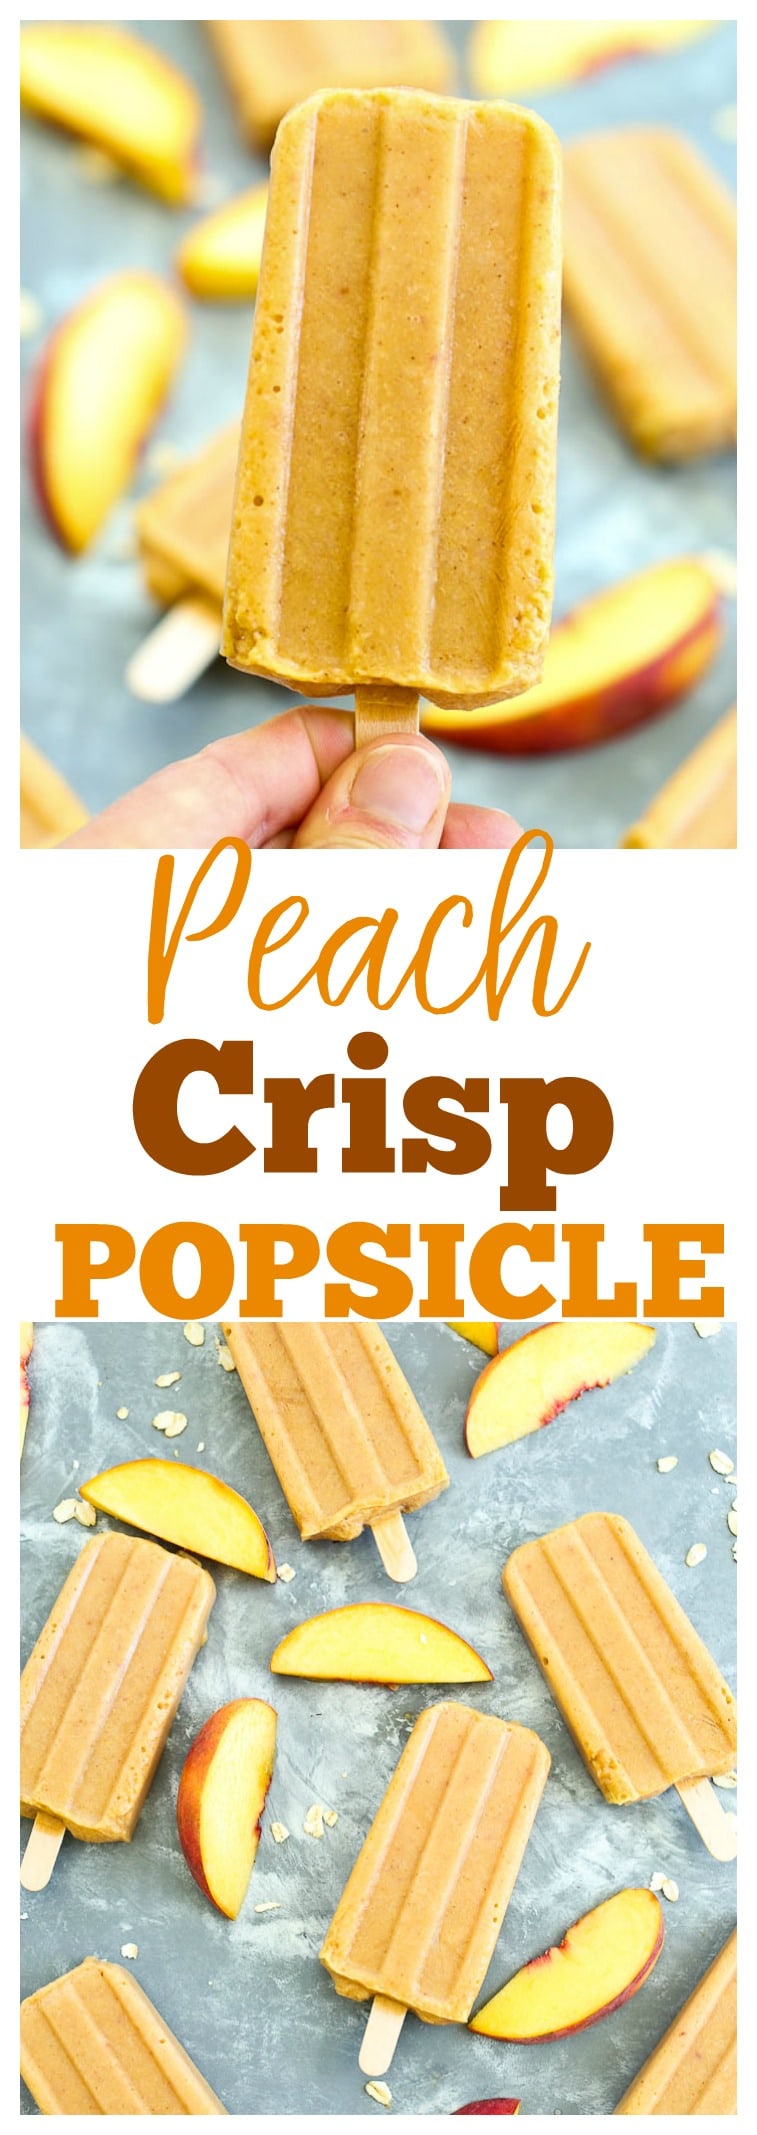 Healthy homemade popsicles are bomb! These Peach Crisp Popsicles taste JUST LIKE peach crisp! Whaaat? Healthy dessert recipe for summer!